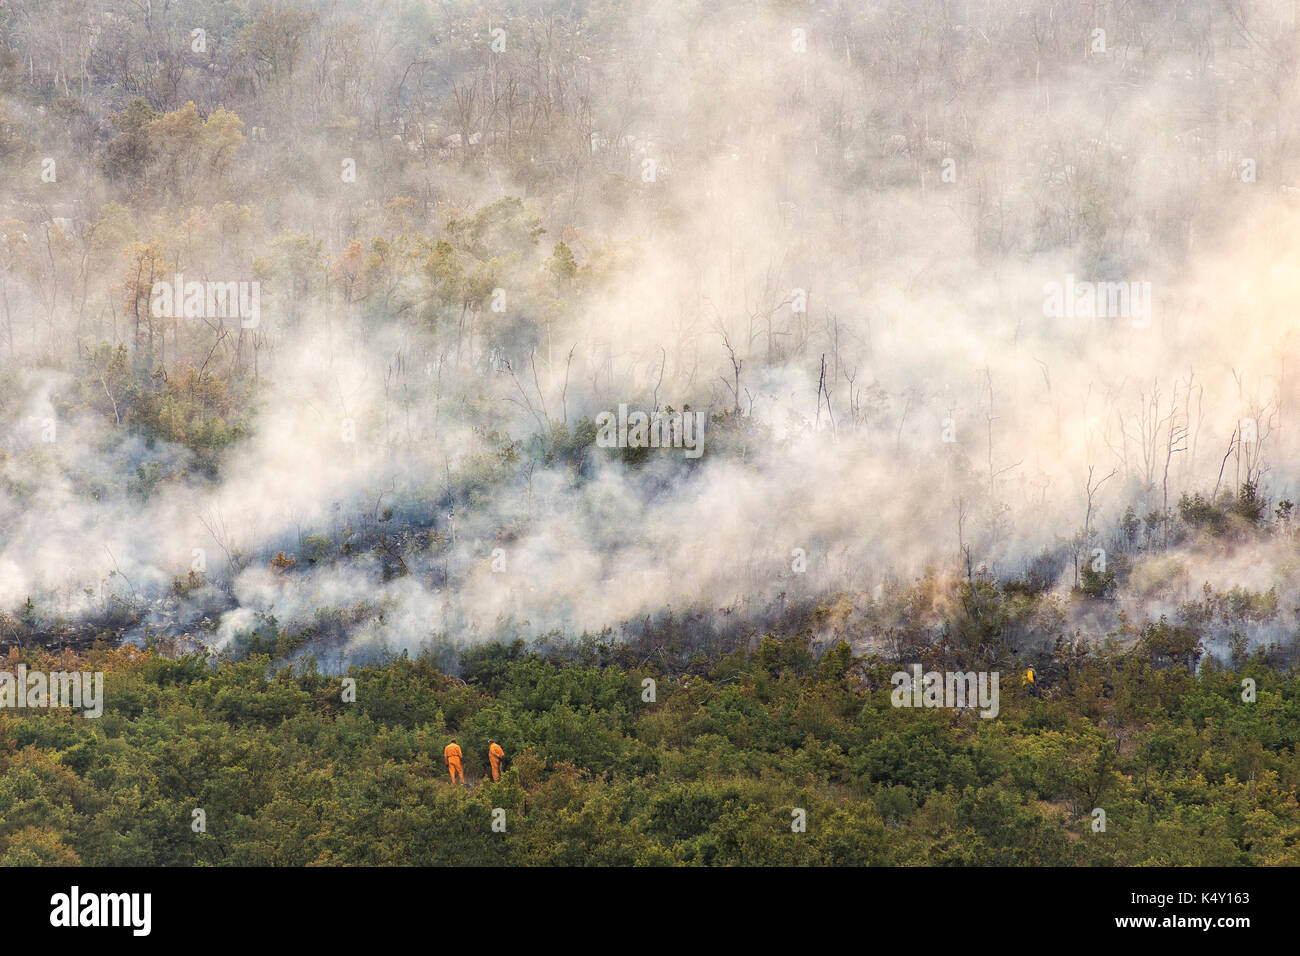 The smoke filled forest from wildfire on mountain Leotar Stock Photo